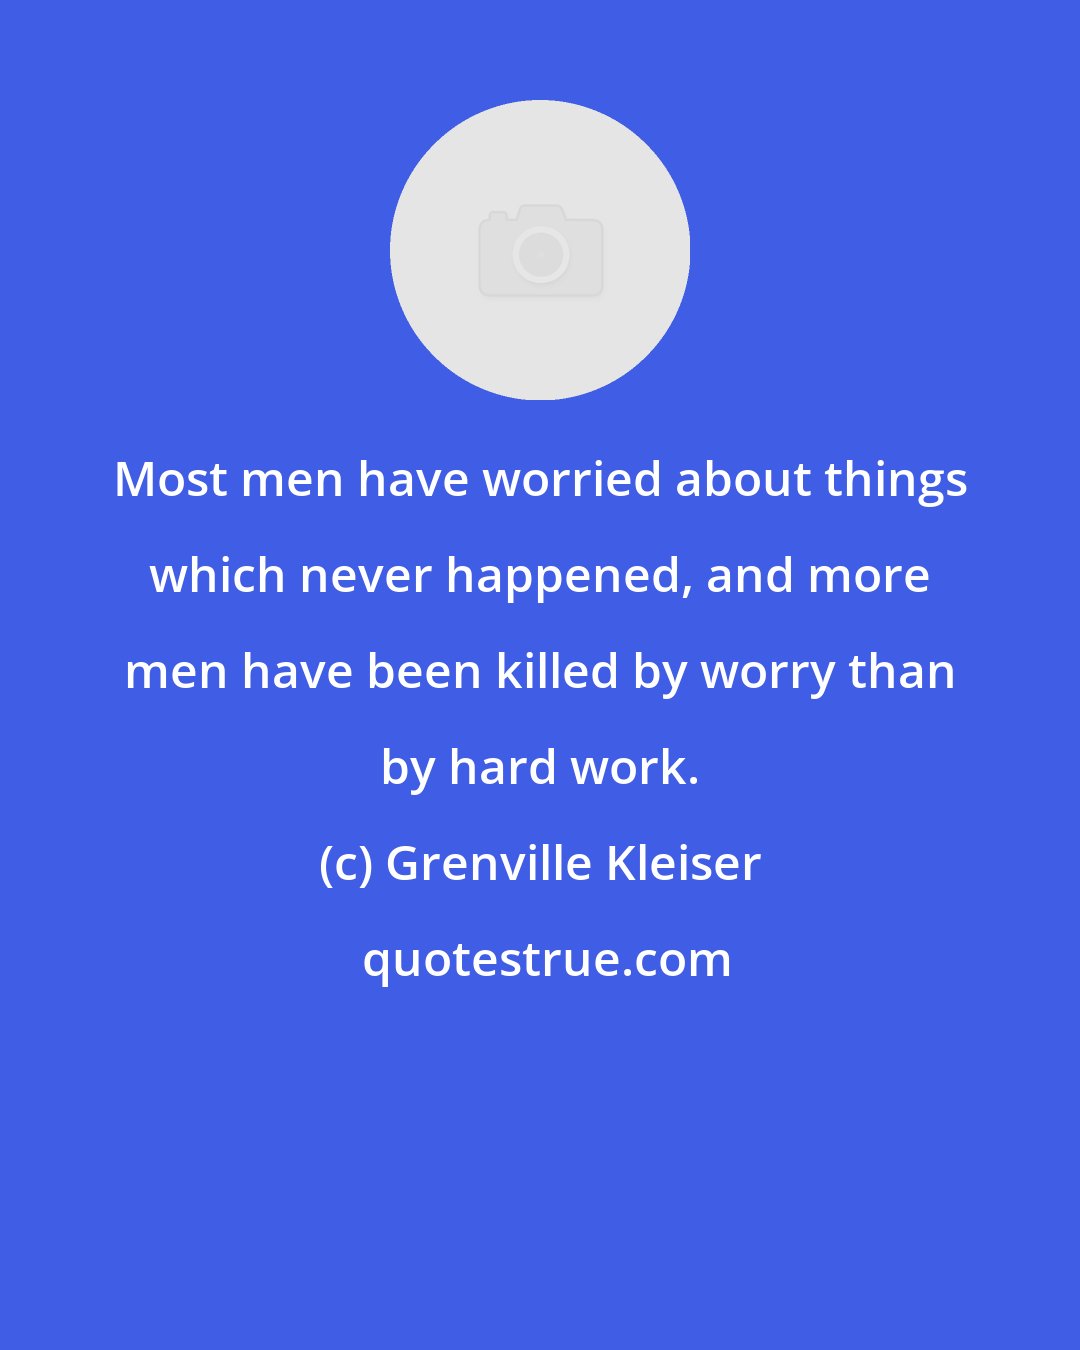 Grenville Kleiser: Most men have worried about things which never happened, and more men have been killed by worry than by hard work.